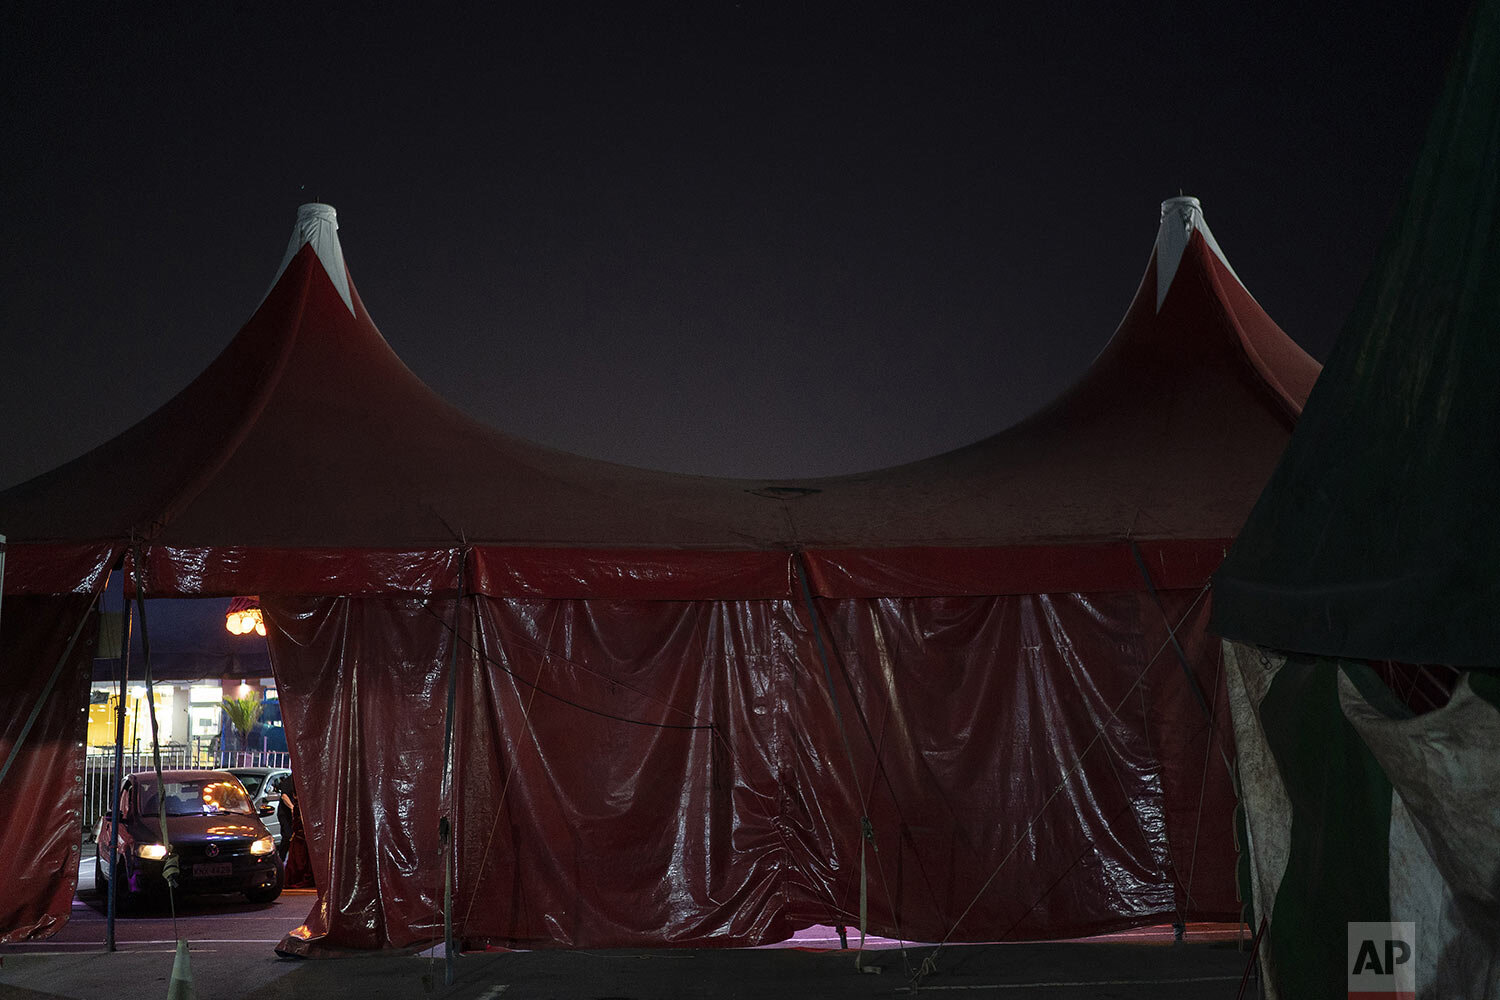  Drivers arrive to watch the Estoril Circus drive-in show in Itaguai, in greater Rio de Janeiro, Brazil, July 18, 2020. (AP Photo/Leo Correa) 